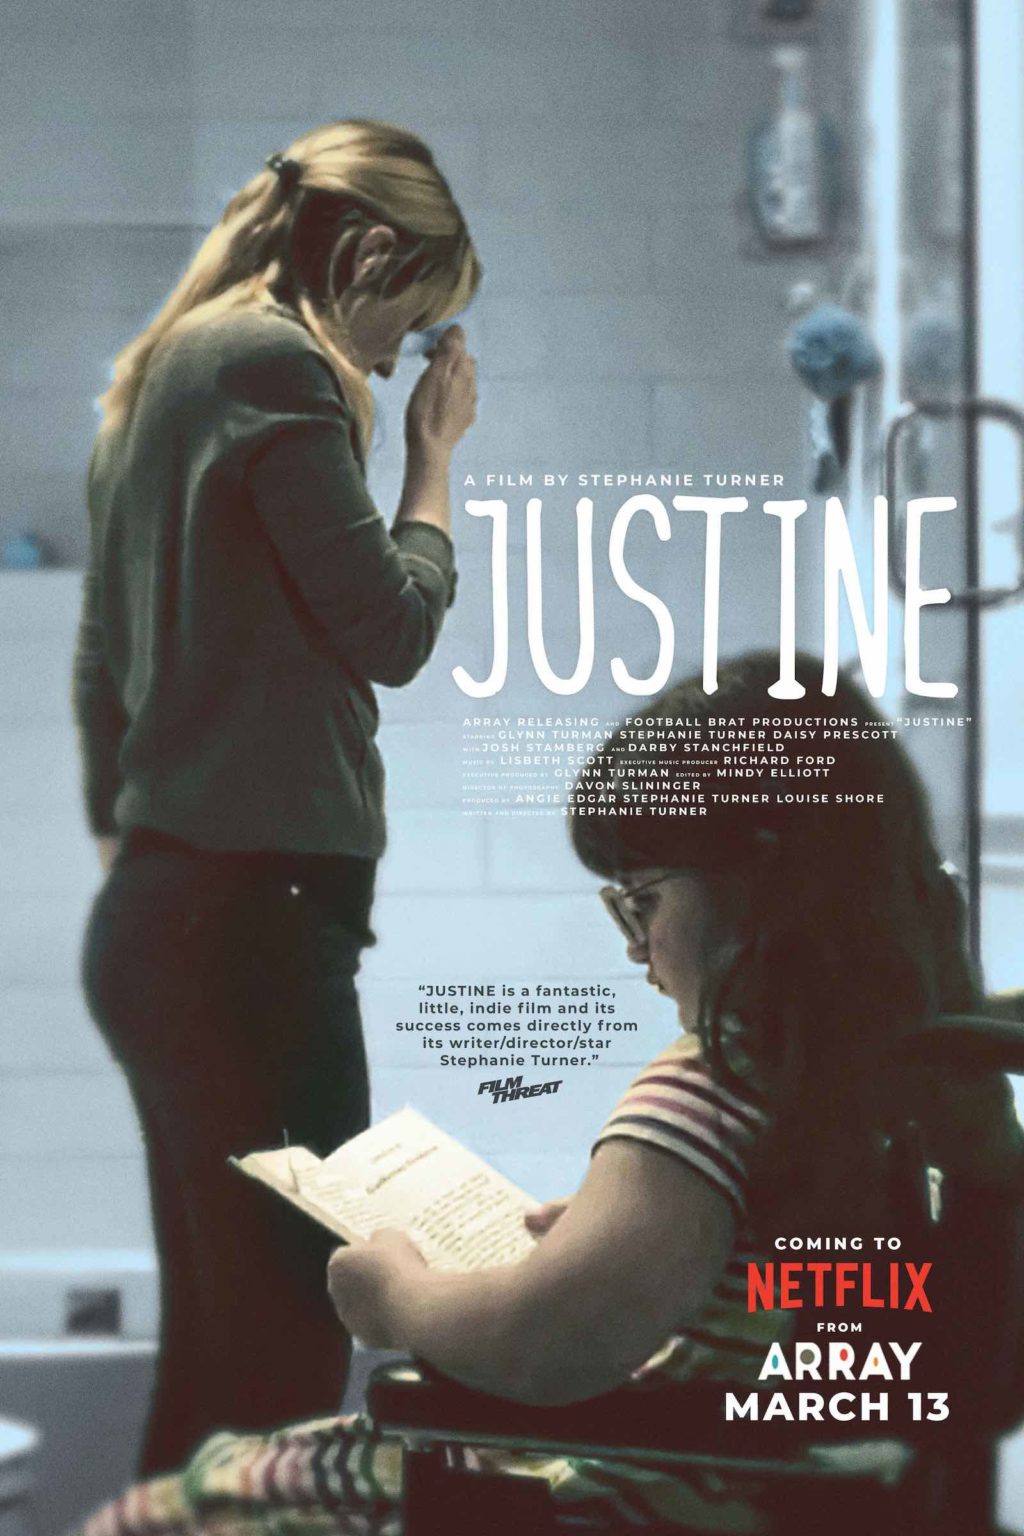 We were delighted to sit down with Stephanie Turner and talk cinema, creativity, and life. Here's what we know about Netflix's 'Justine'.